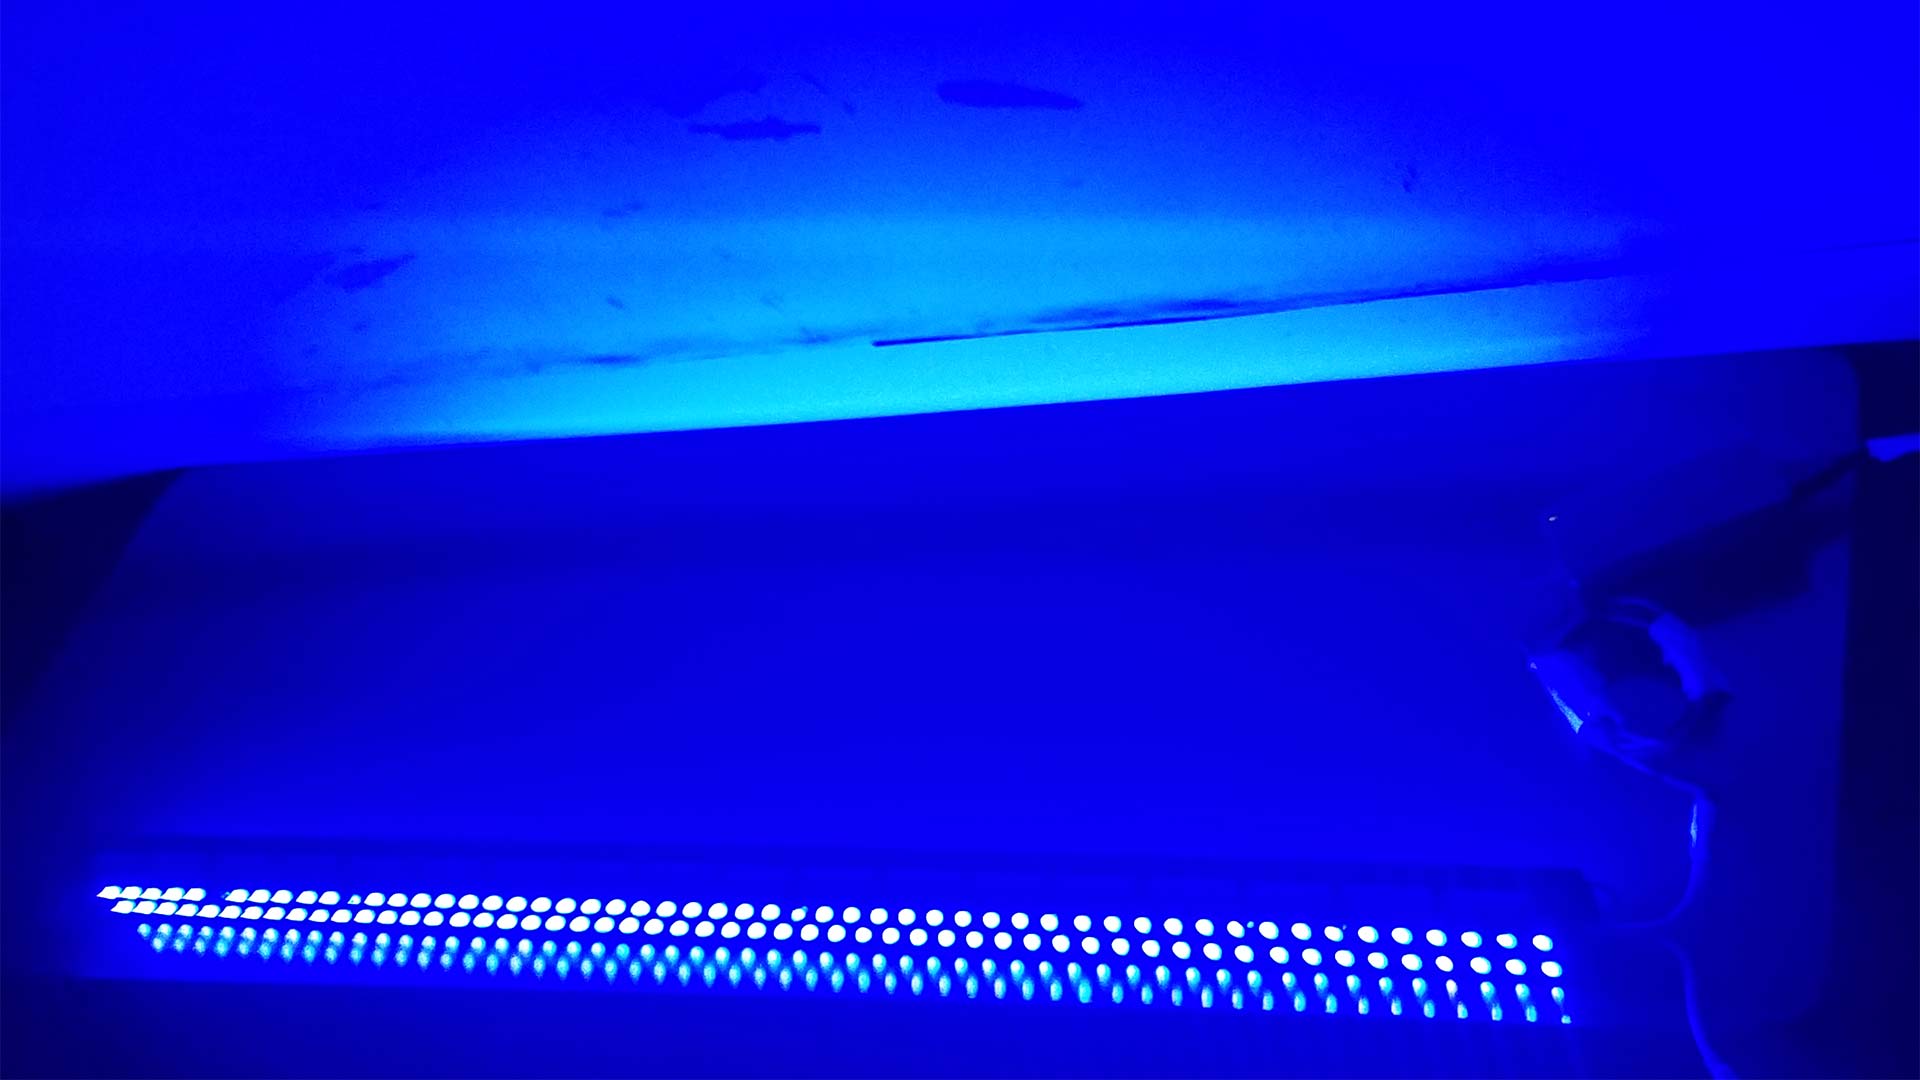 The Burn In Test with the LED Strips